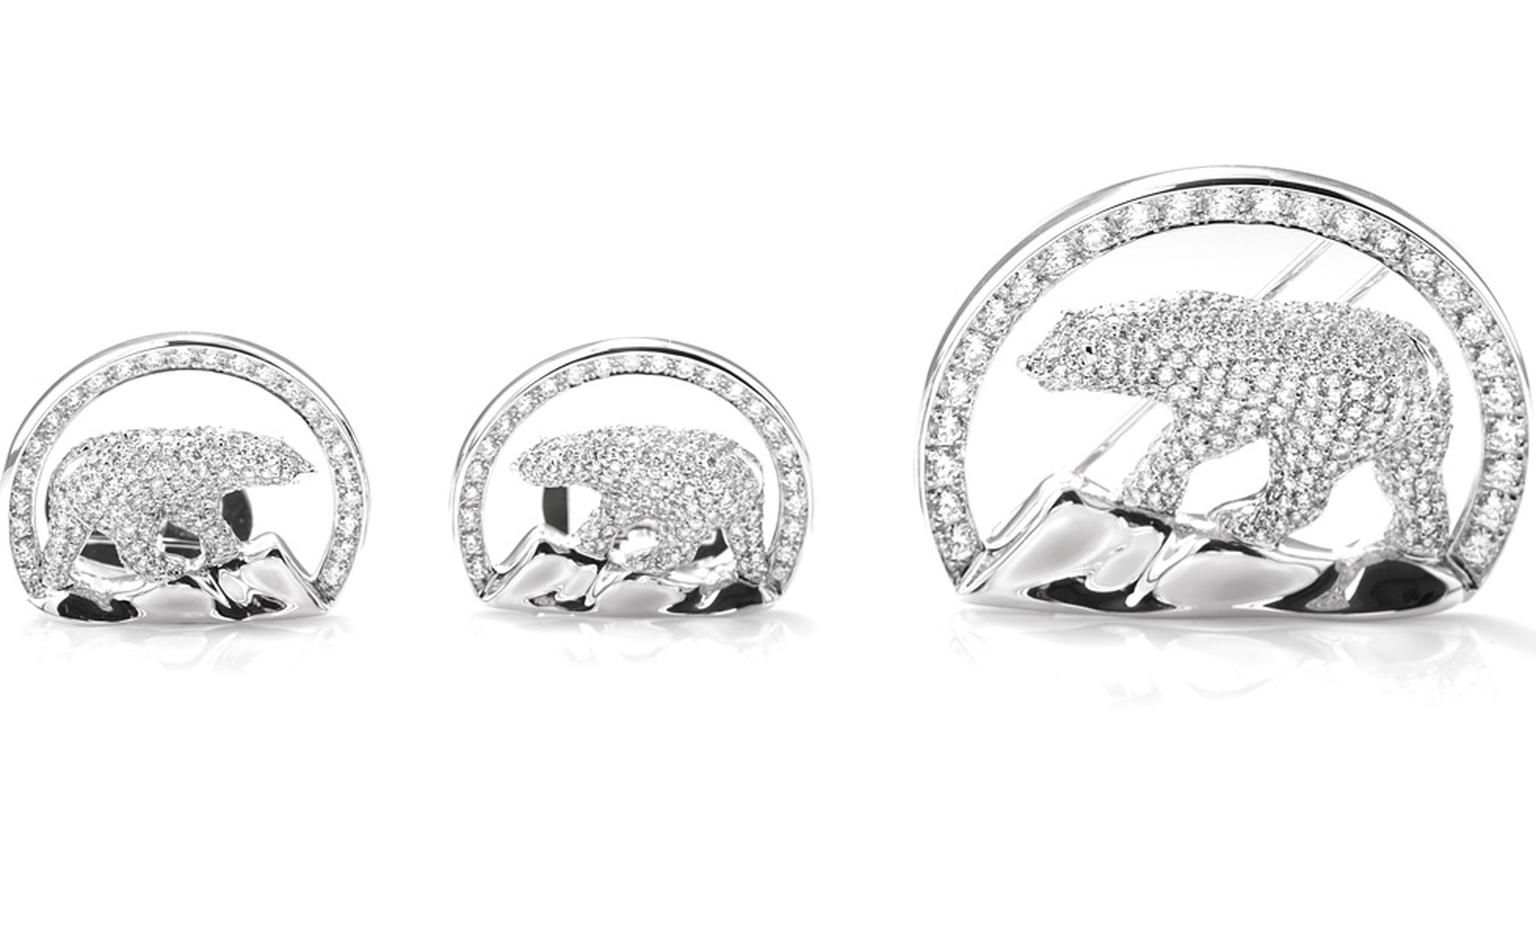 Harry Winston donated the diamonds from the Diavik mine in the Northwest Territories and made the jewels featuring the region's  logo of a polar bear.